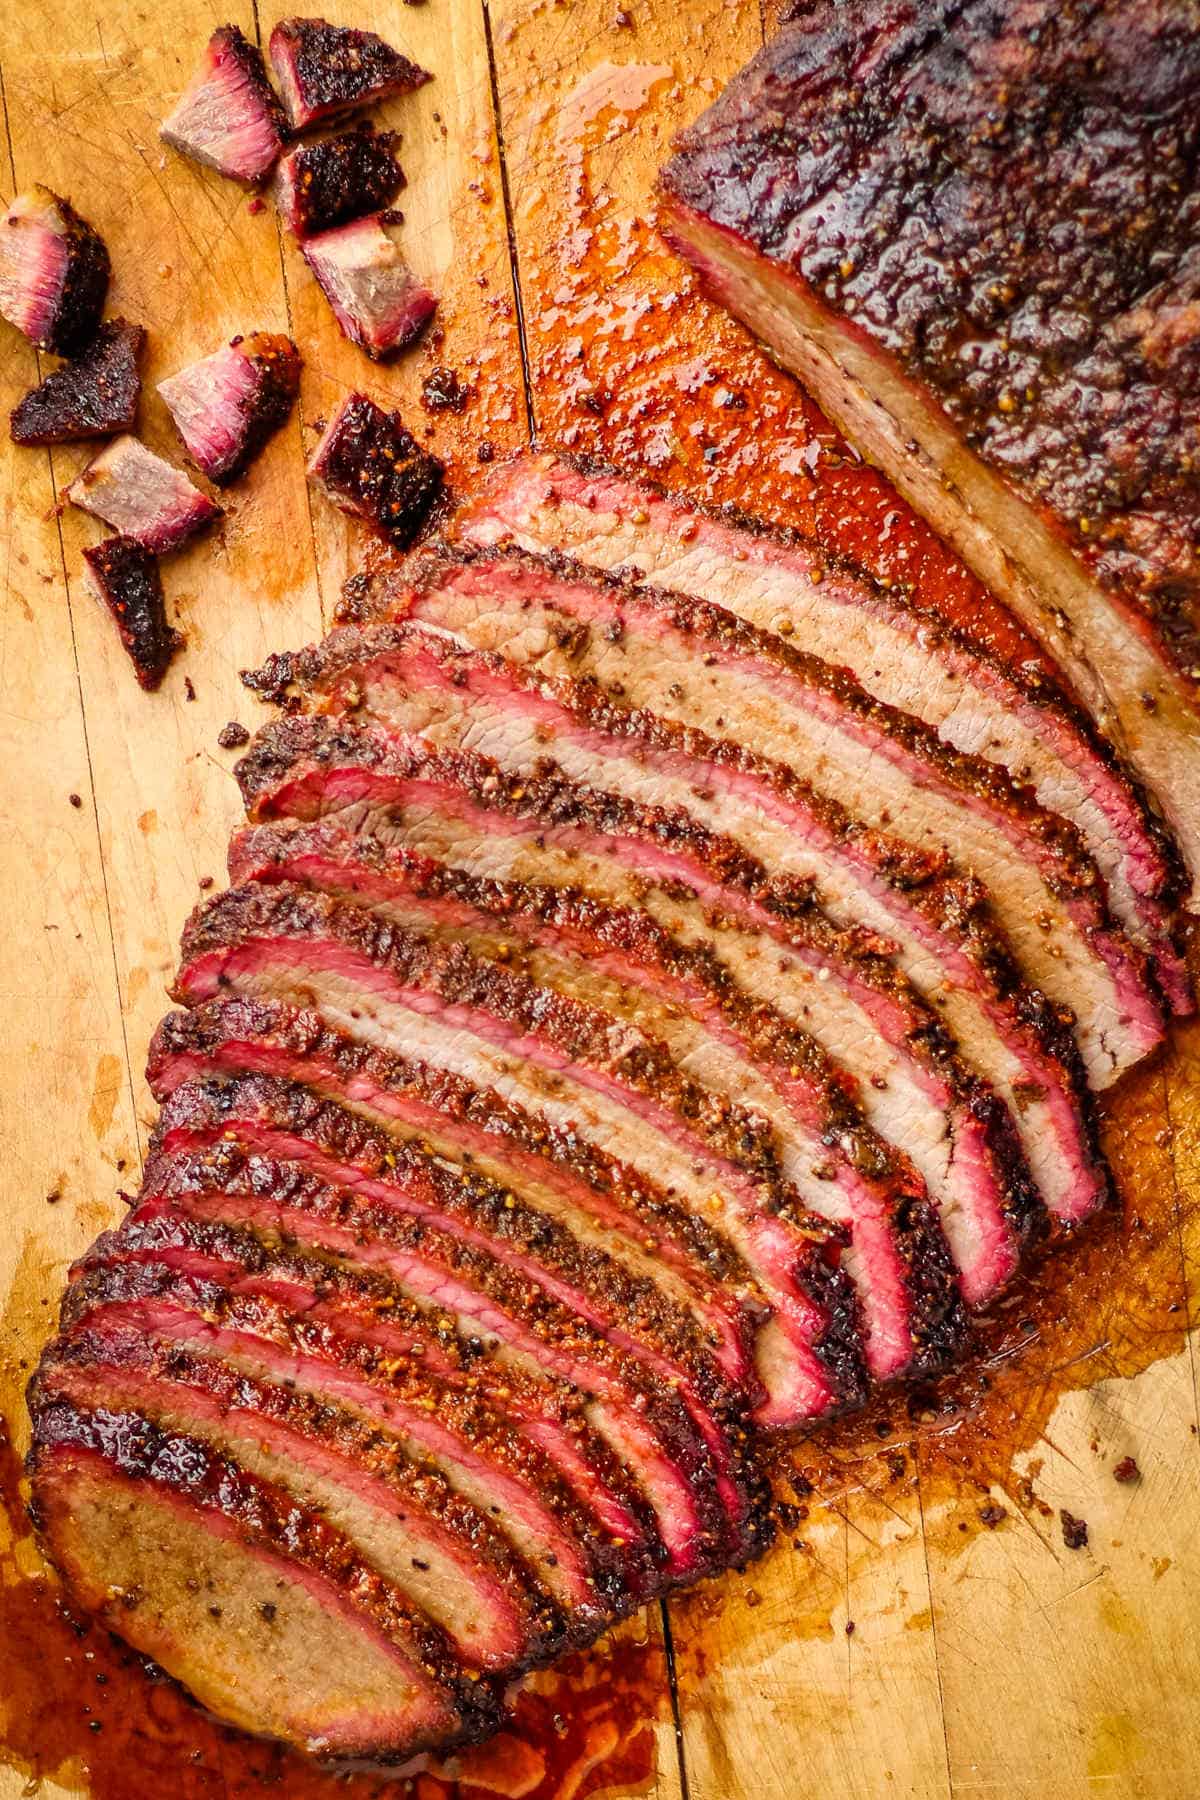 Sliced smoked pellet grill brisket on a wooden cutting board.